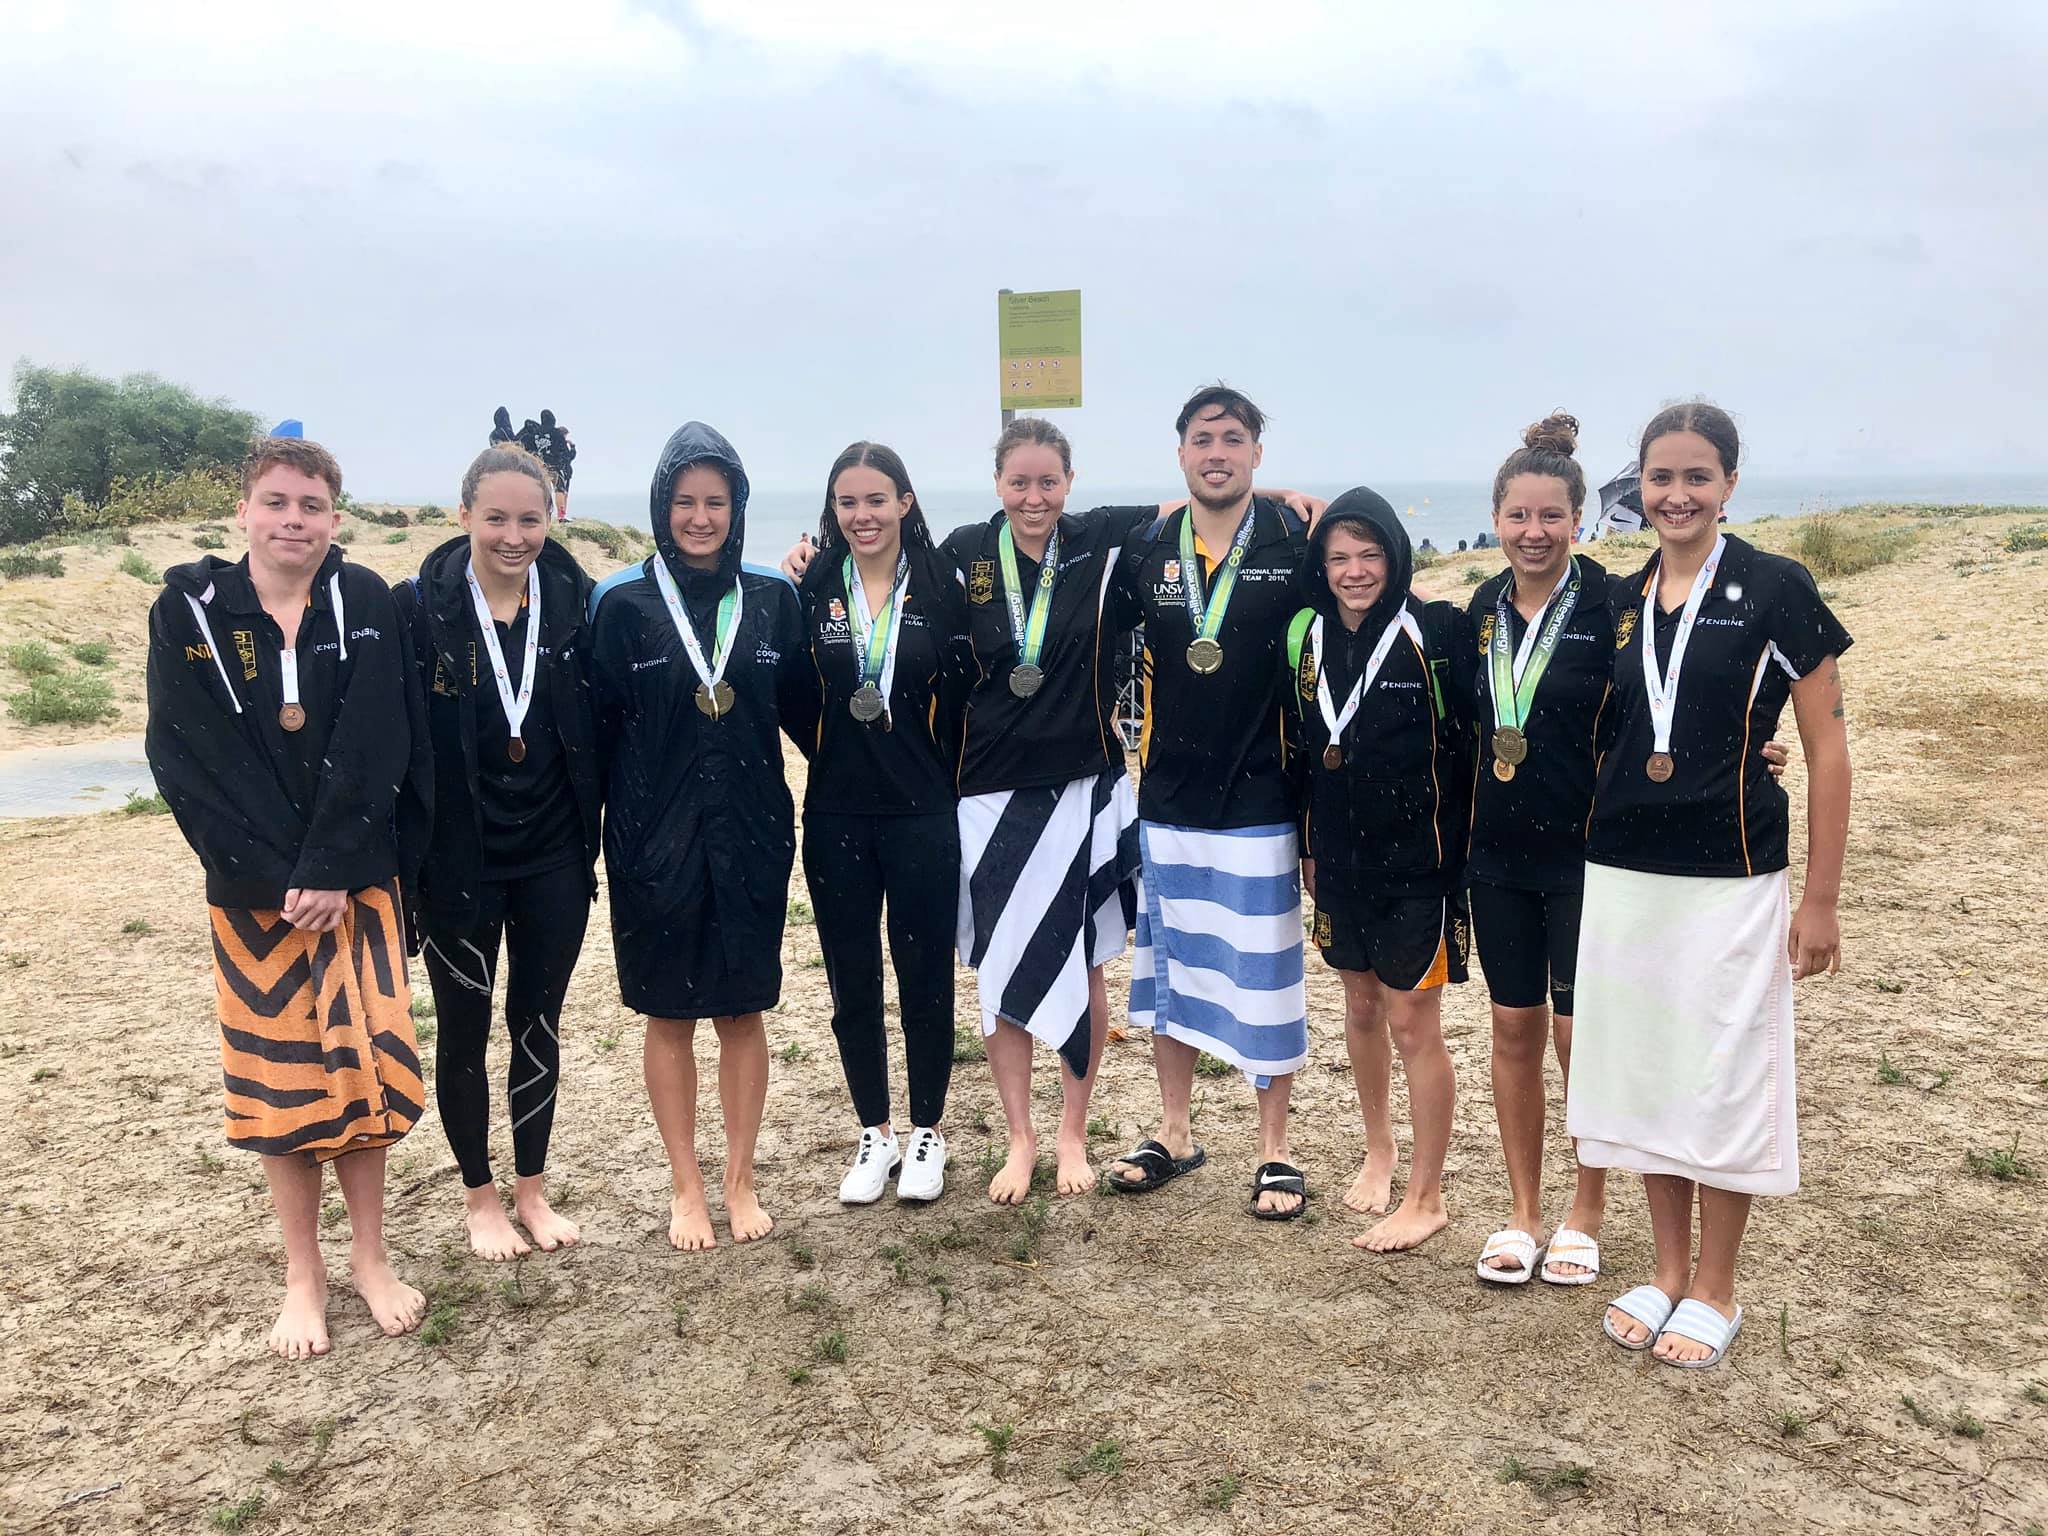 The UNSW Open Water medallists from the event at Kurnell last weekend.